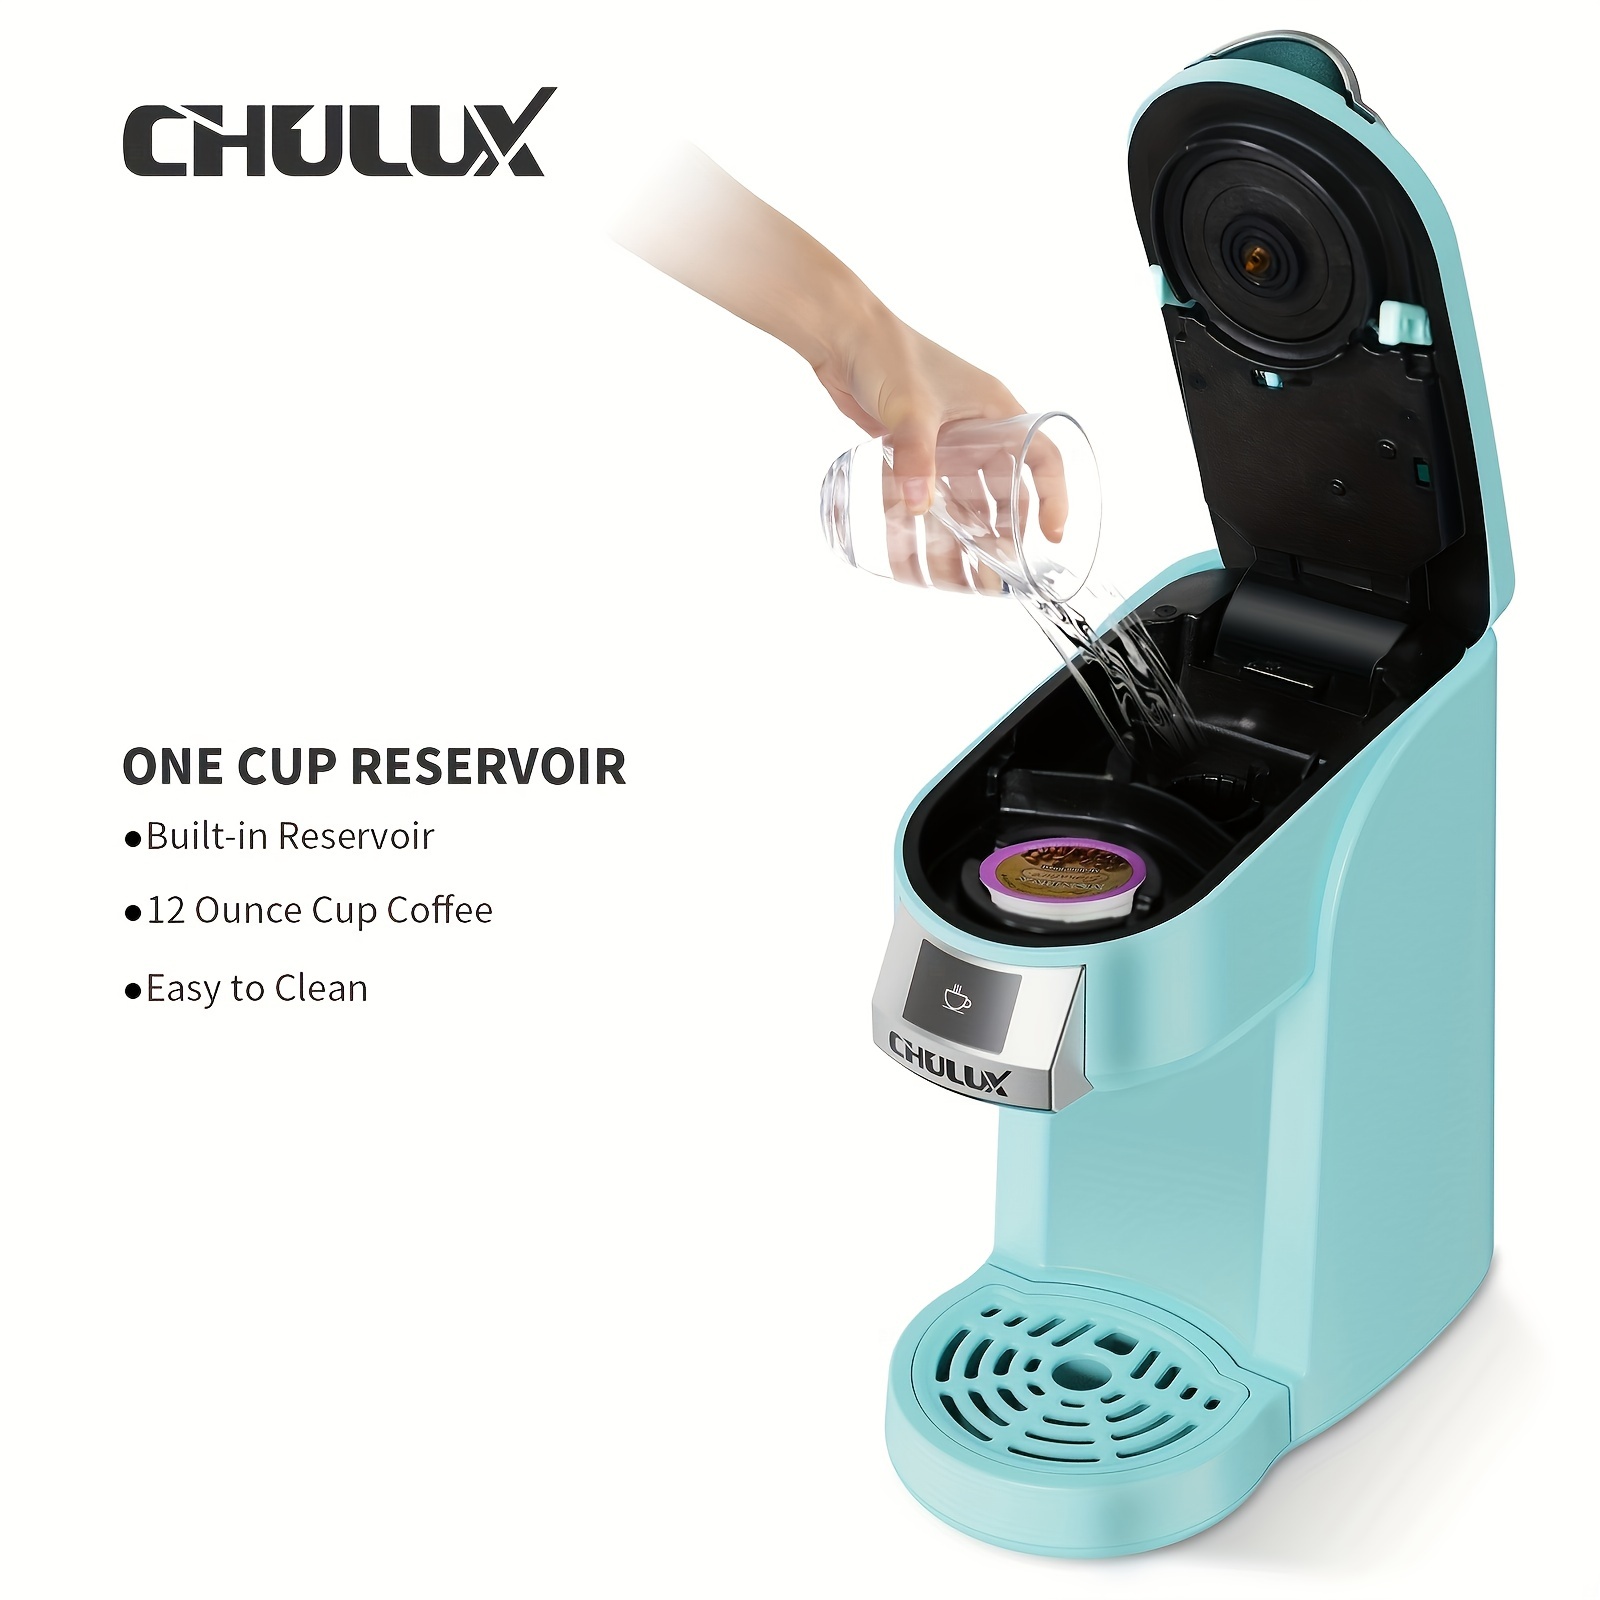 Chulux Single Serve Coffee Maker Brewer for Single Cup Capsule with 12 Ounce